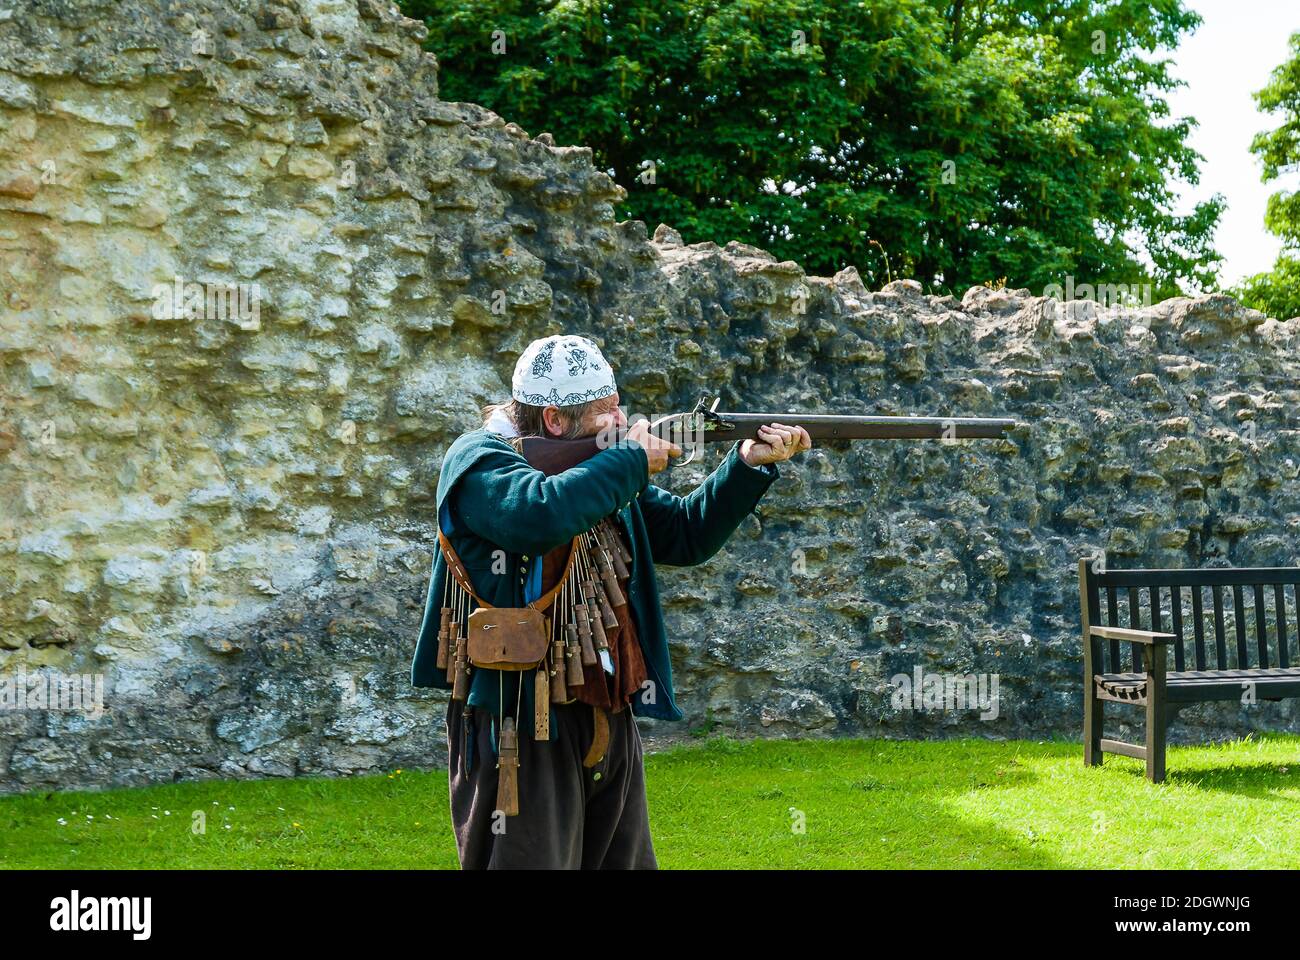 Taking Aim!  A Costume Display at the Old Castle at Sherborne. Stock Photo